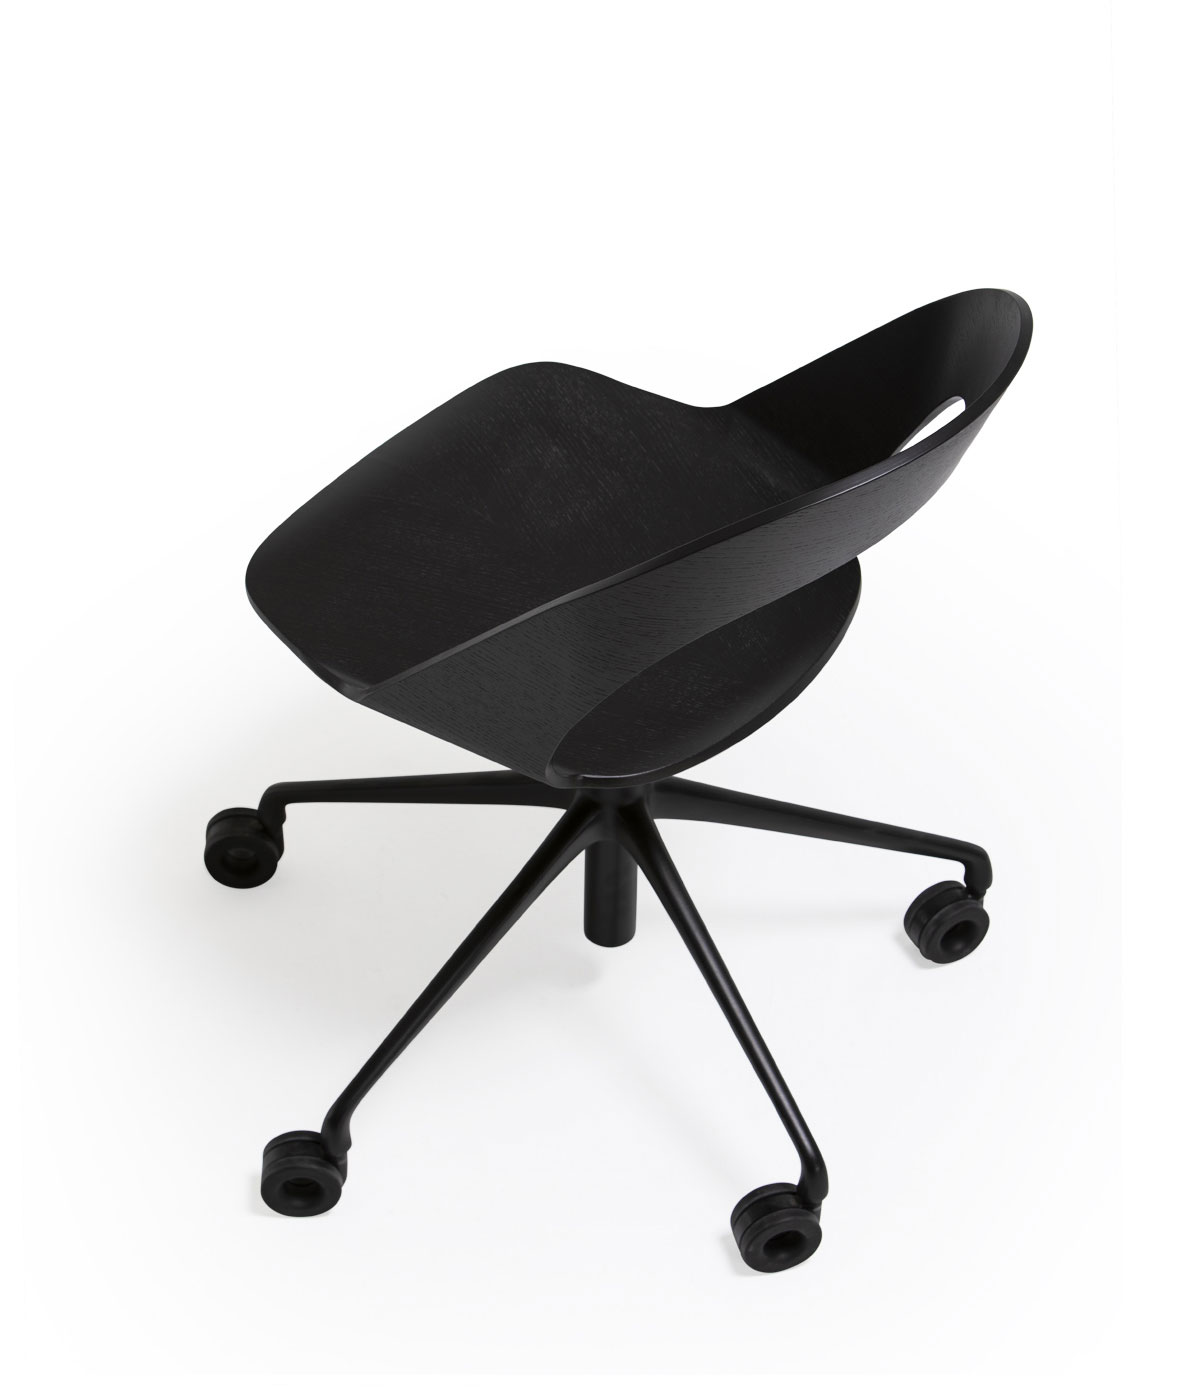 Goose chair Model D with swivel base and gas lift, 5 rollers - Vergés